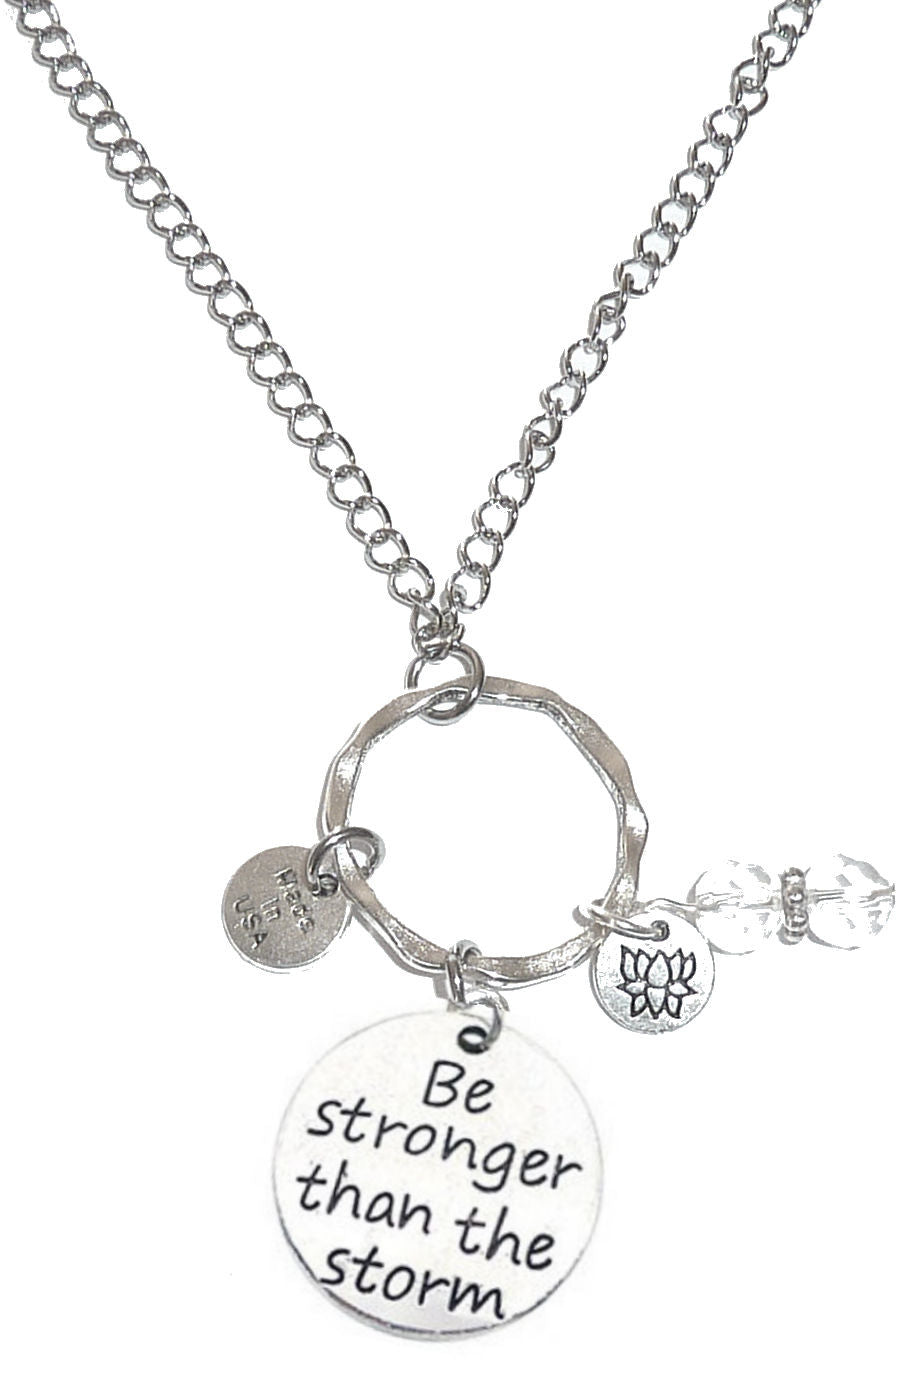 Rearview Mirror Charms - Be Stronger Than The Storm